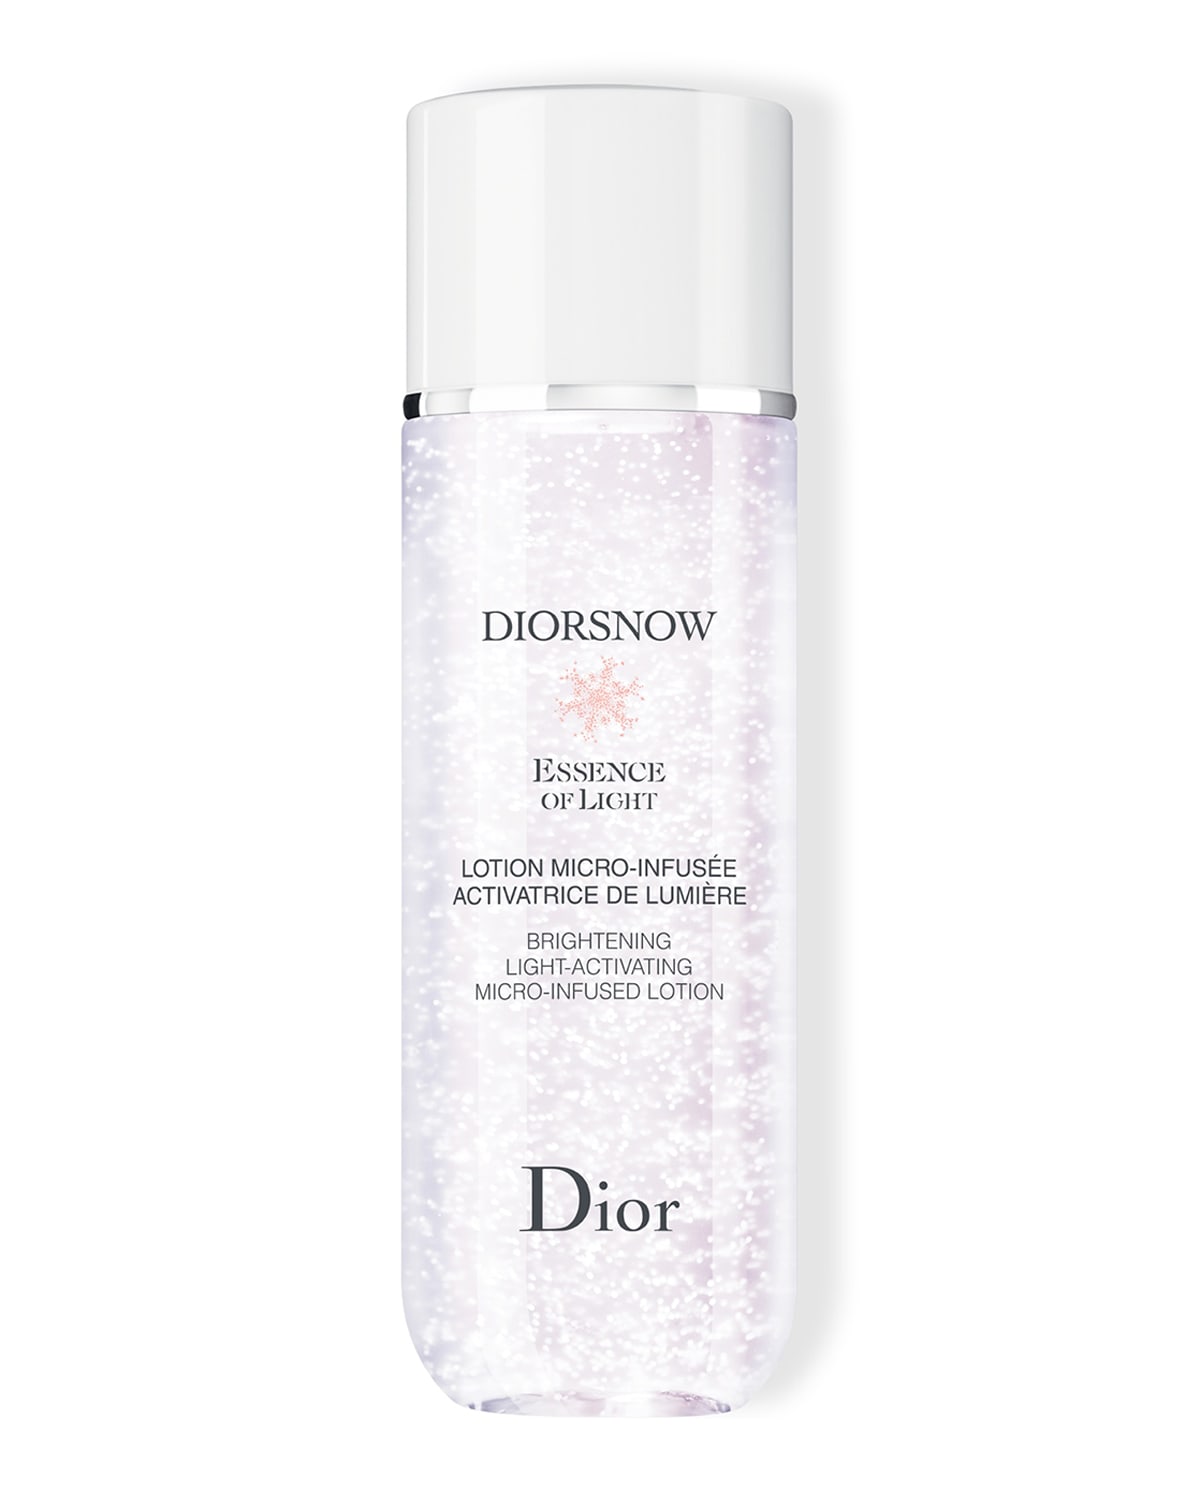 DIORSNOW Essence of Light Micro-infused Lotion, 5.9 oz.